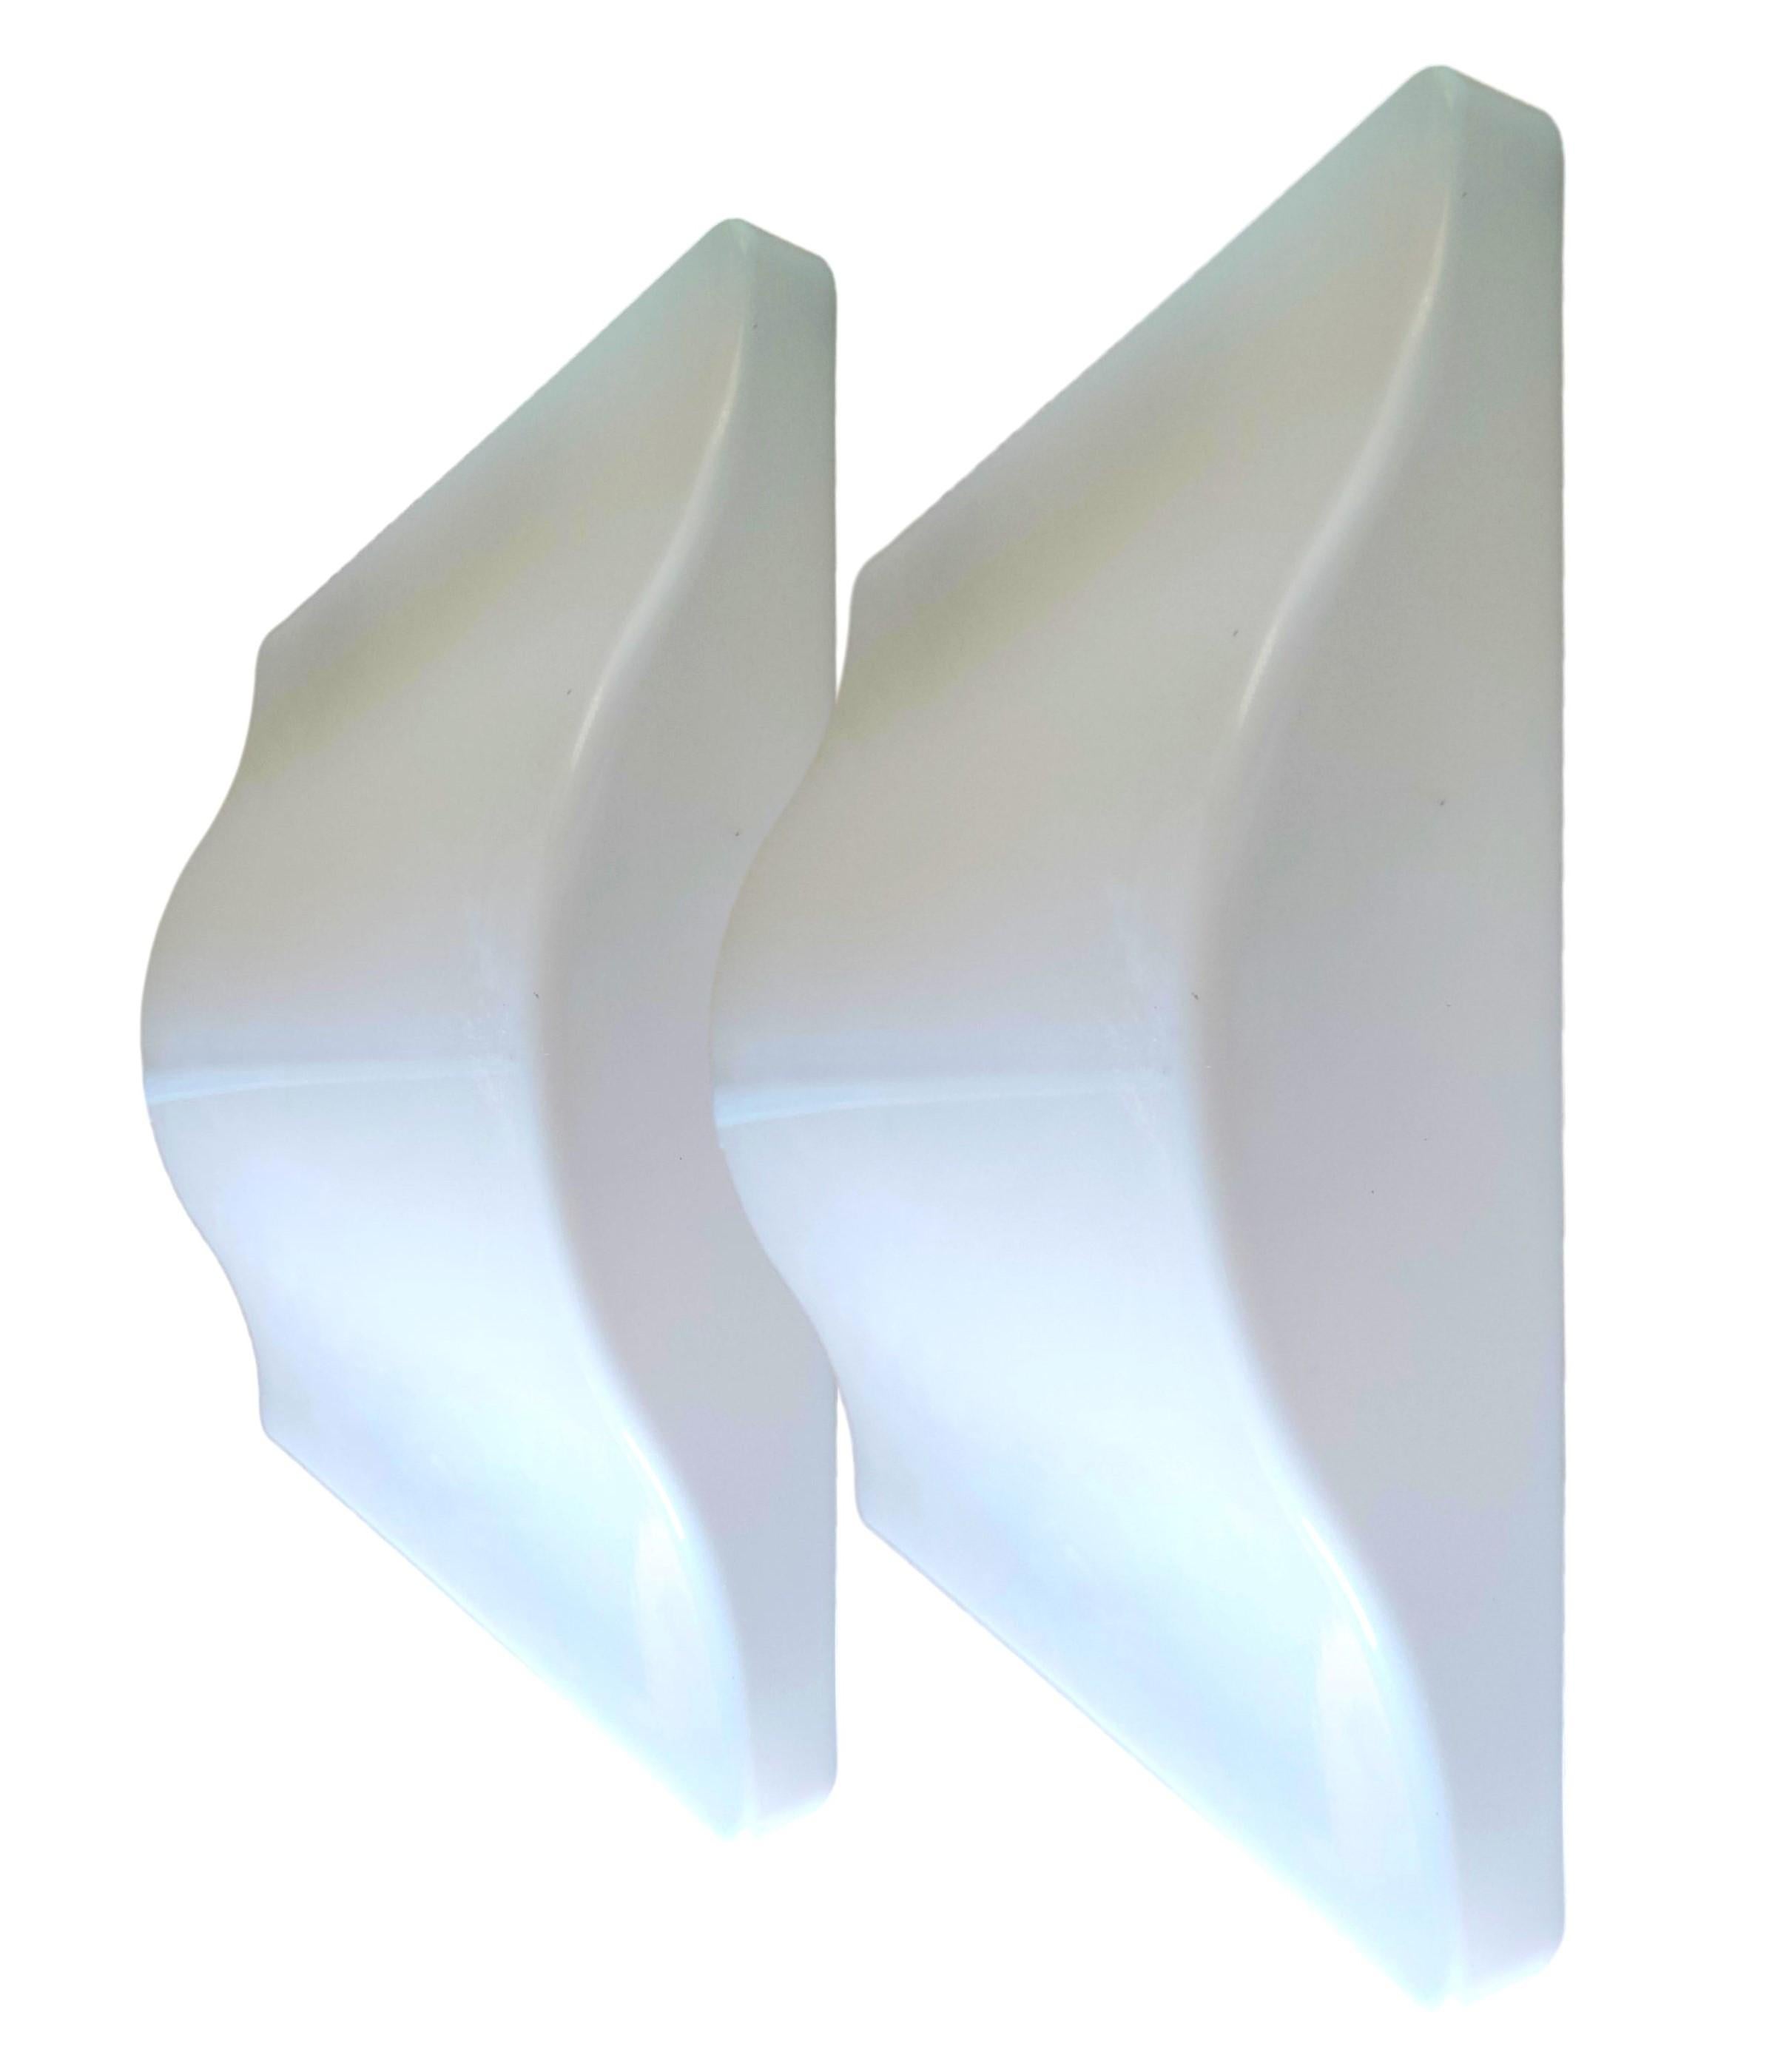 pair of wall sconces iguzzini wall lamps wave model 5359 - guzzini 37x37 For Sale 2